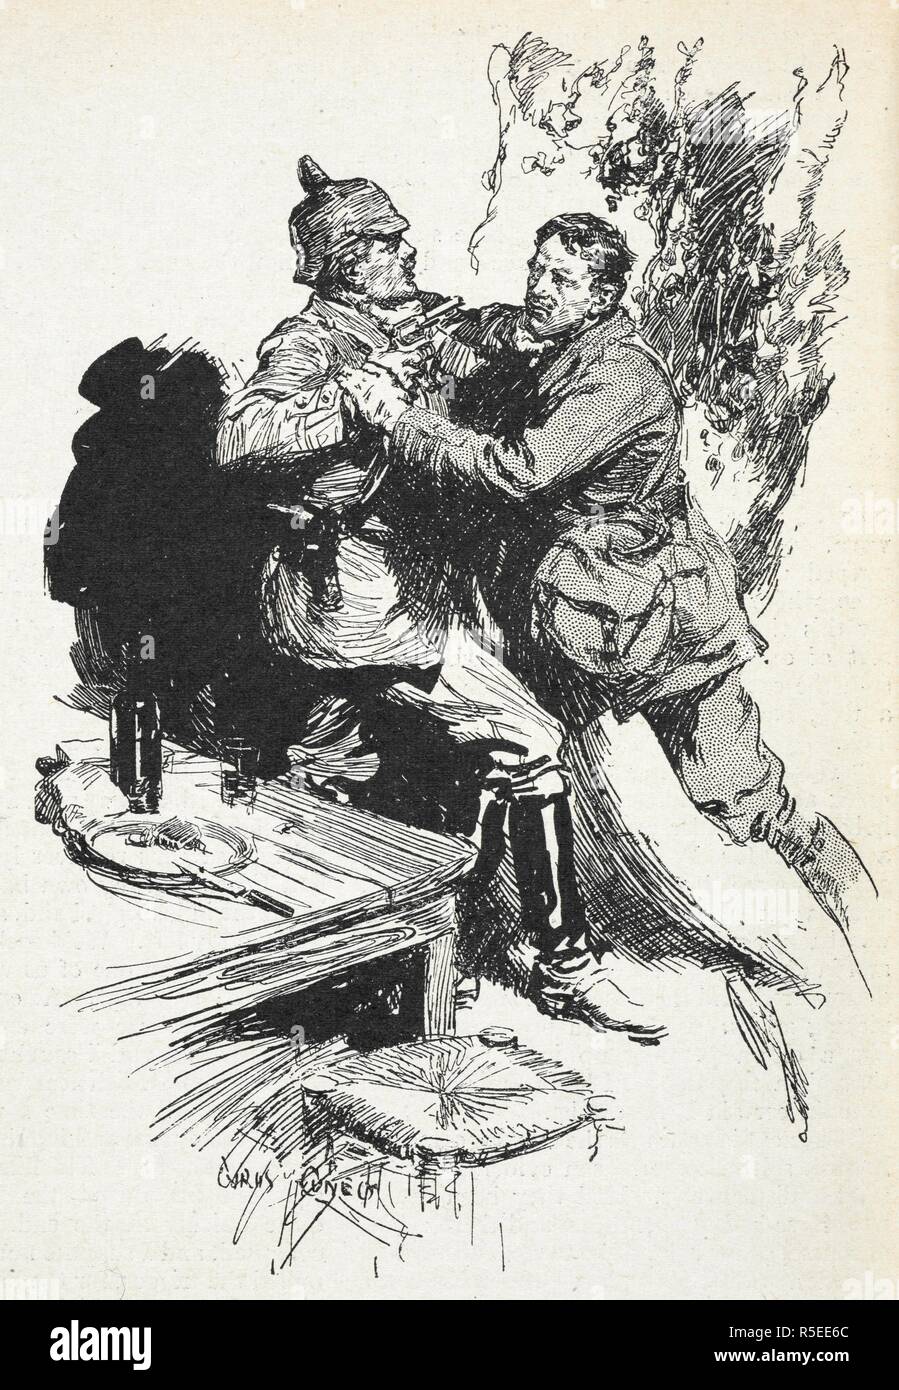 Illustration to a story by 'Sapper', 'the motor-gun'. A British and German soldier grappling with each. A story of the first world war. The Strand magazine : an illustrated monthly / edited by G. Newnes. London : George Newnes. 1916. Source: P.P.6004.glk volume LI, no.306. Page 616. Author: McNeile, H. C.Cuneo, Cyrus. Stock Photo